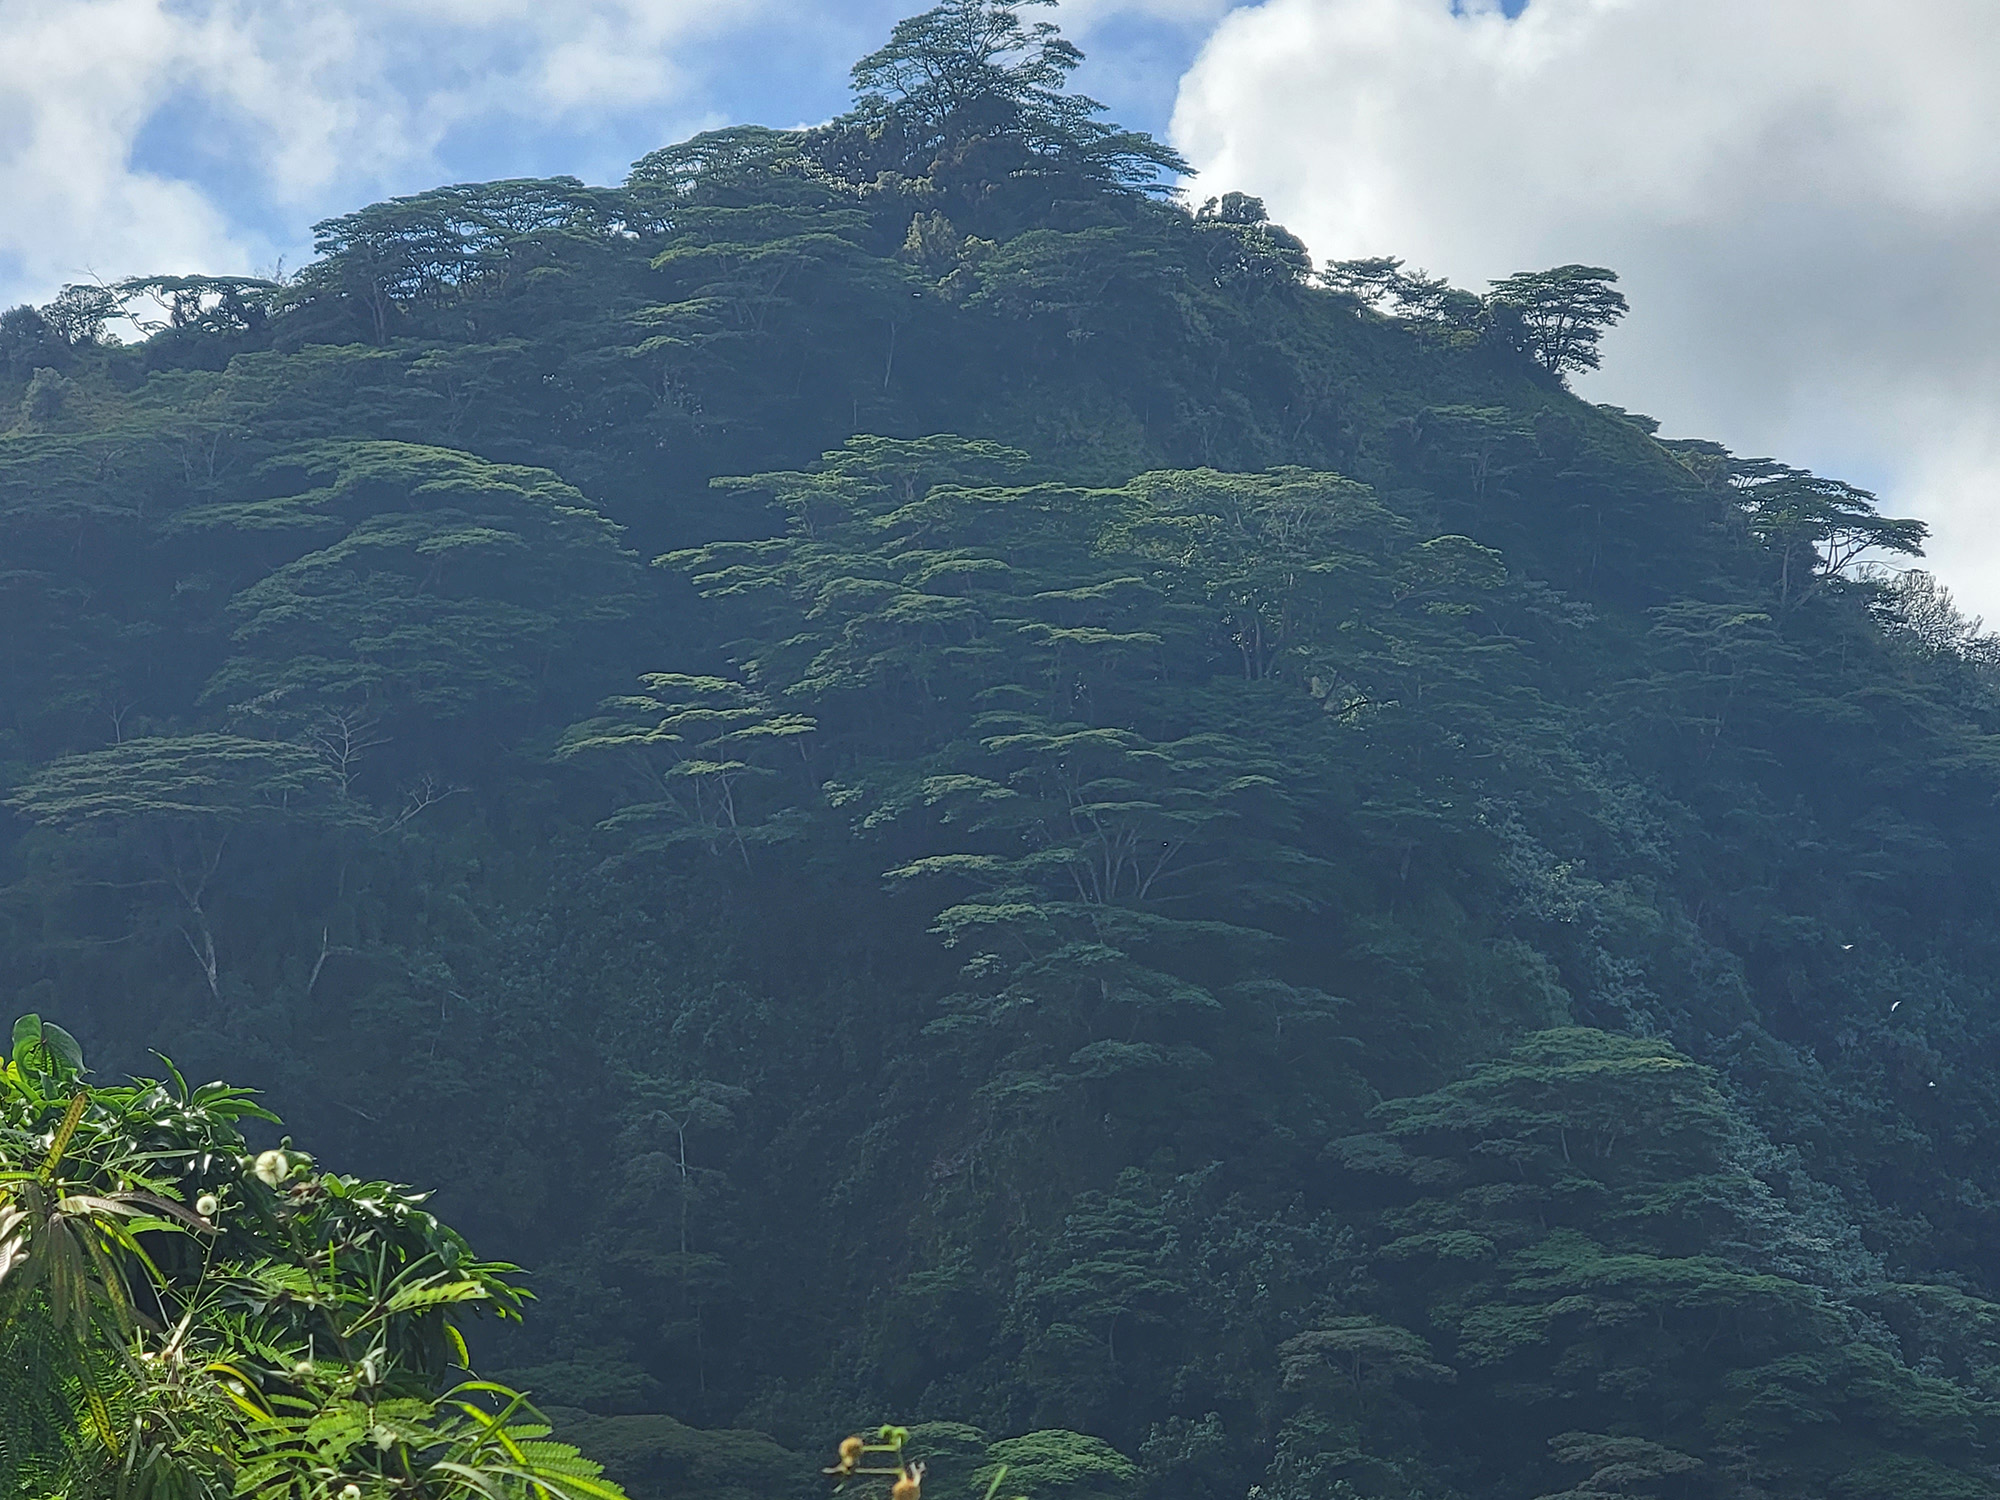 A tropical hillside covered with falcata trees, which inspired the Falcata Group logo.